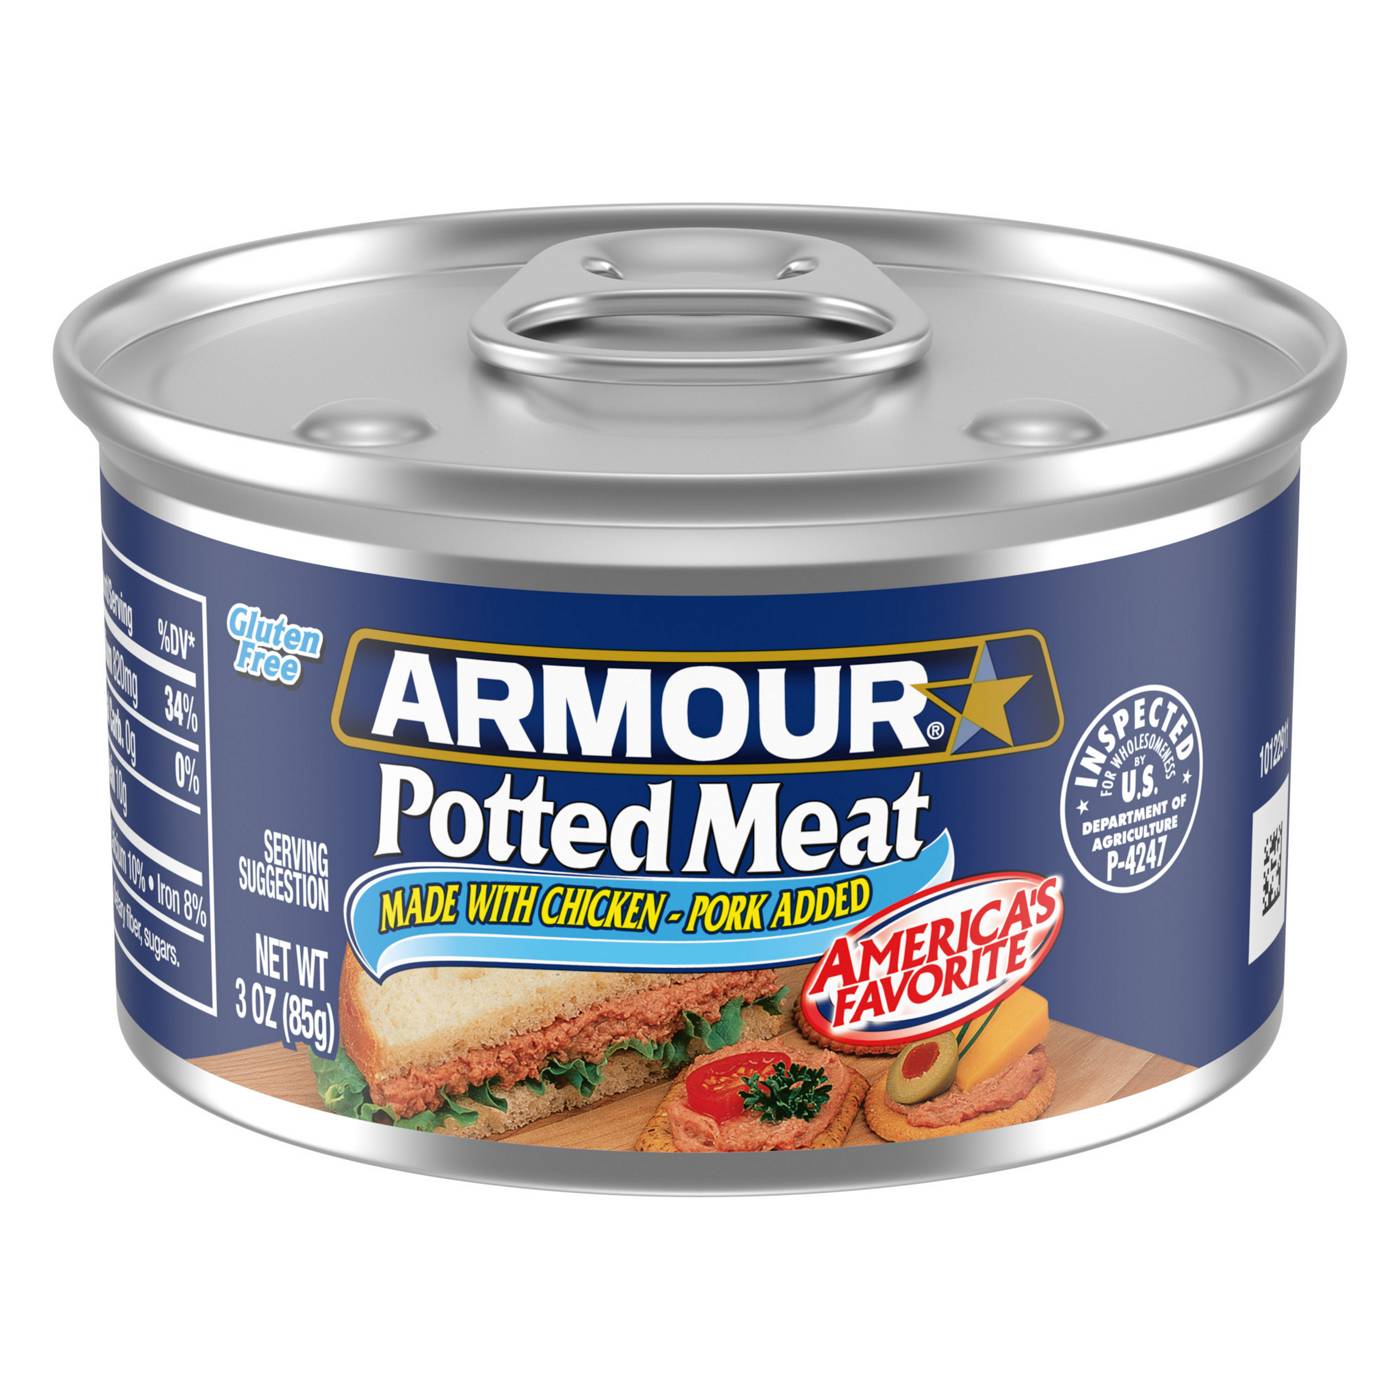 Armour Potted Meat; image 1 of 4